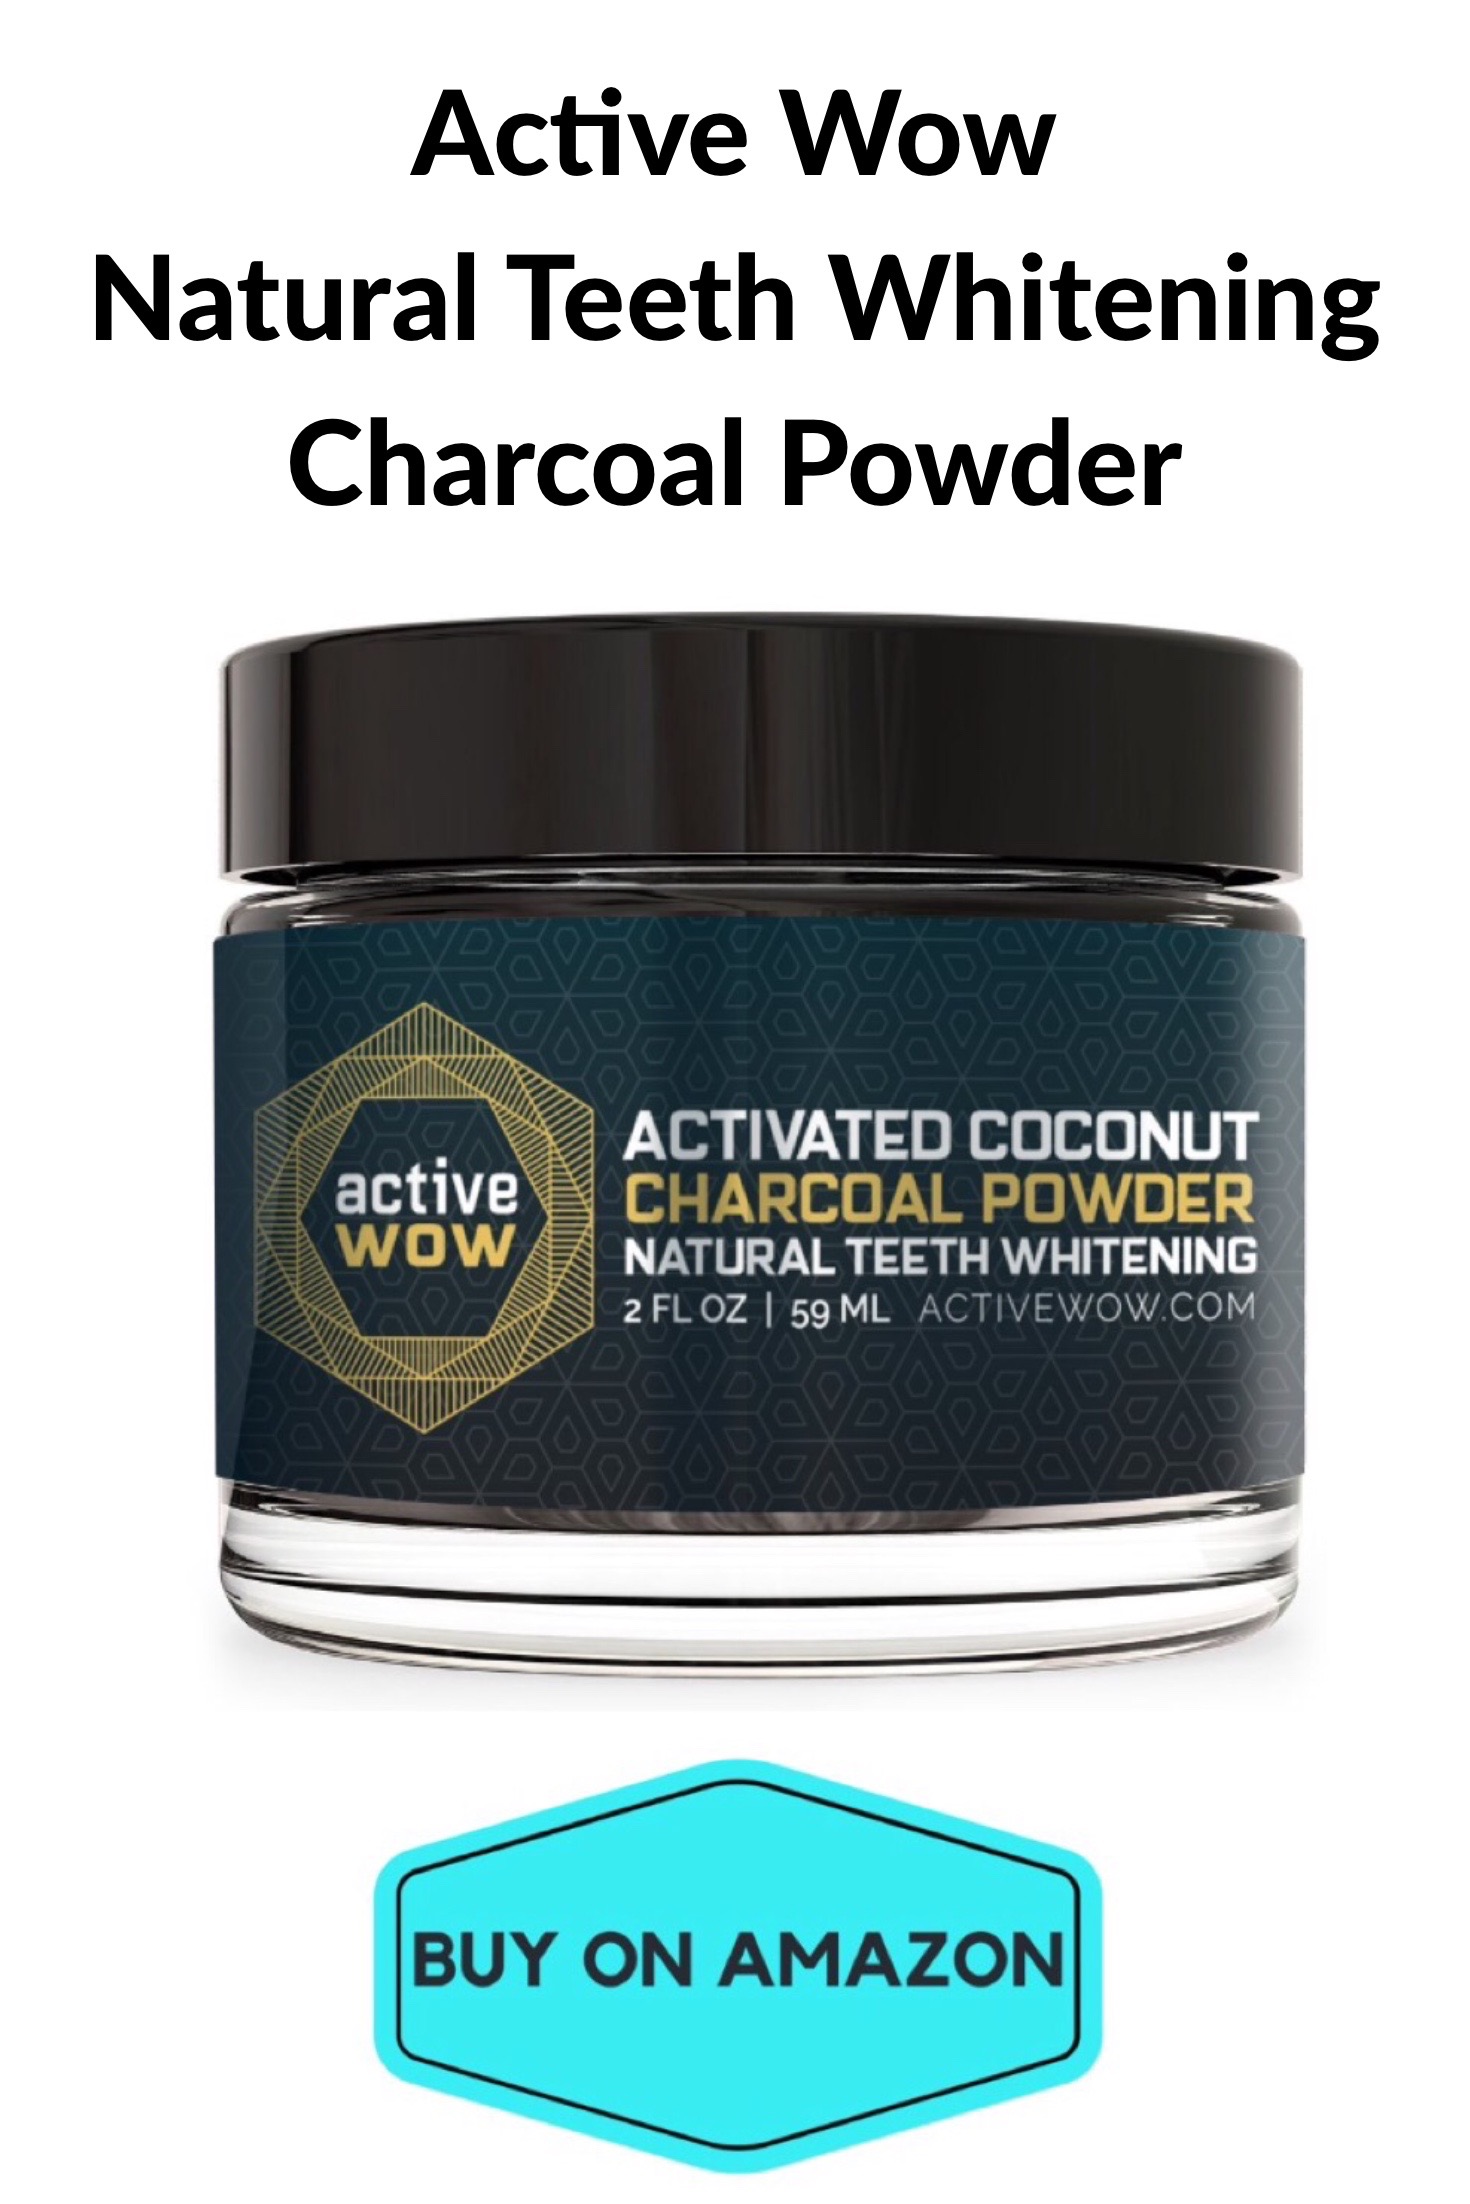 Active Wow Natural Teeth Whitening Charcoal Powder